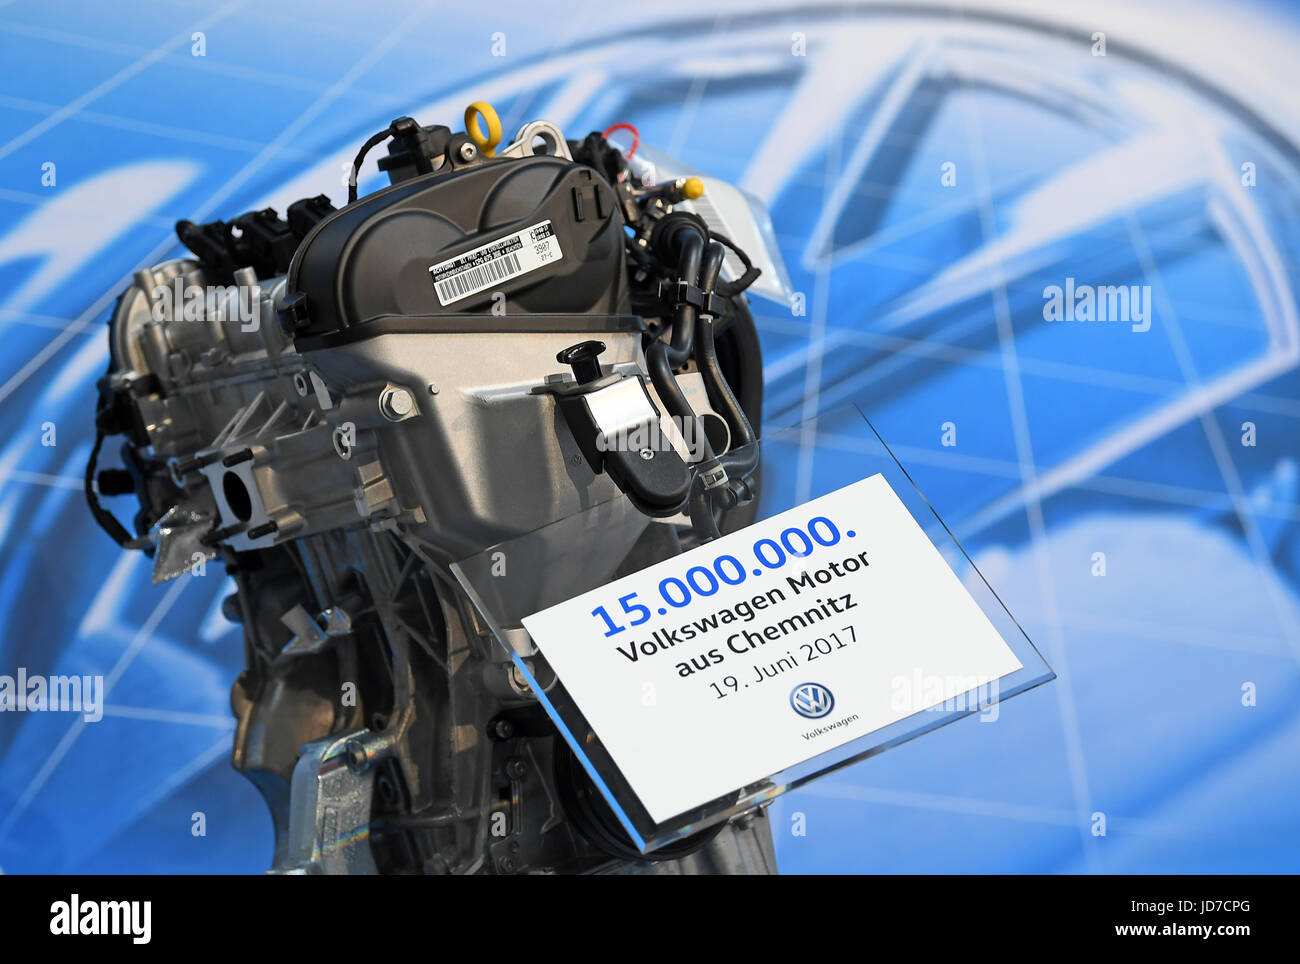 Chemnitz, Germany. 19th June, 2017. A sign can be seen on the 15 millionth engine of the Volkswagen workshop in Chemnitz, Germany, 19 June 2017. The jubilee machine is a 1, 0 litre natural gas engine with the capacity of 50 kilo watt. The first engine in Chemnitz was produced in April 1988, it was a 1, 3 litre version designated for the Wartburg car model. Volkswagen builds hybrid engines, petrol engines and CNG engines (Compressed Natural Gas). They currently employ 1650 people. Photo: Hendrik Schmidt/dpa-Zentralbild/ZB/dpa/Alamy Live News Stock Photo